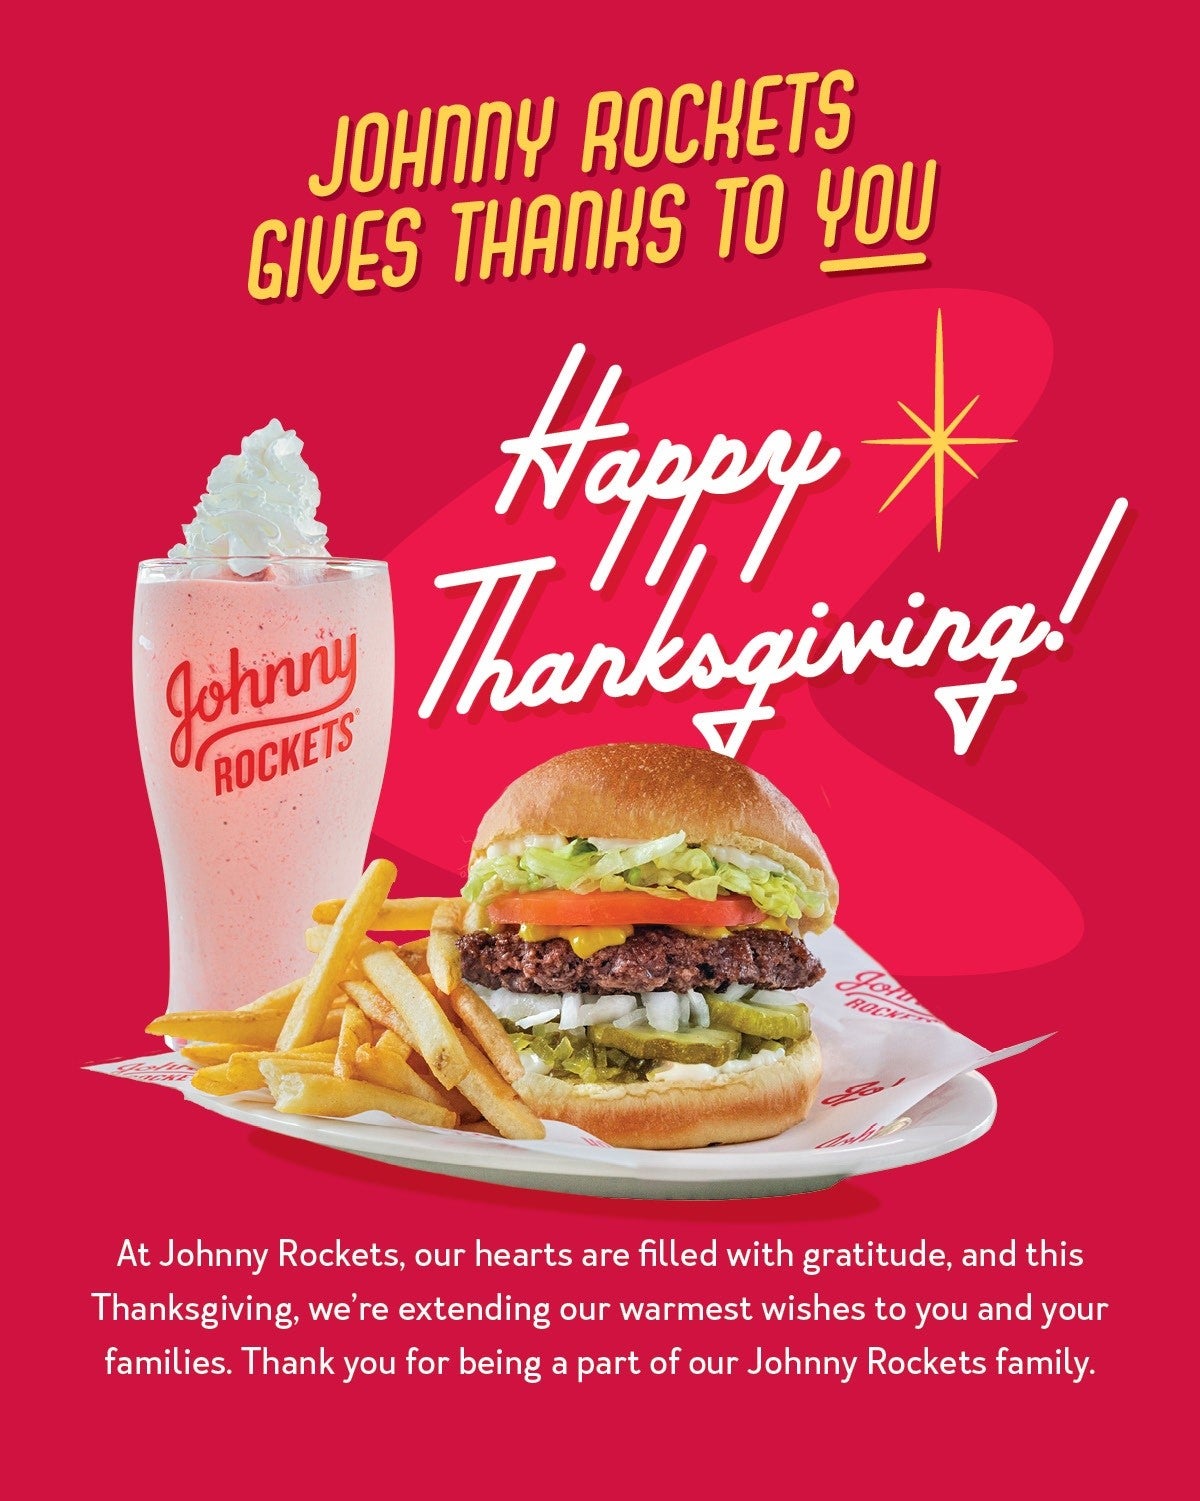 Happy Thanksgiving from the Johnny Rockets Family to You